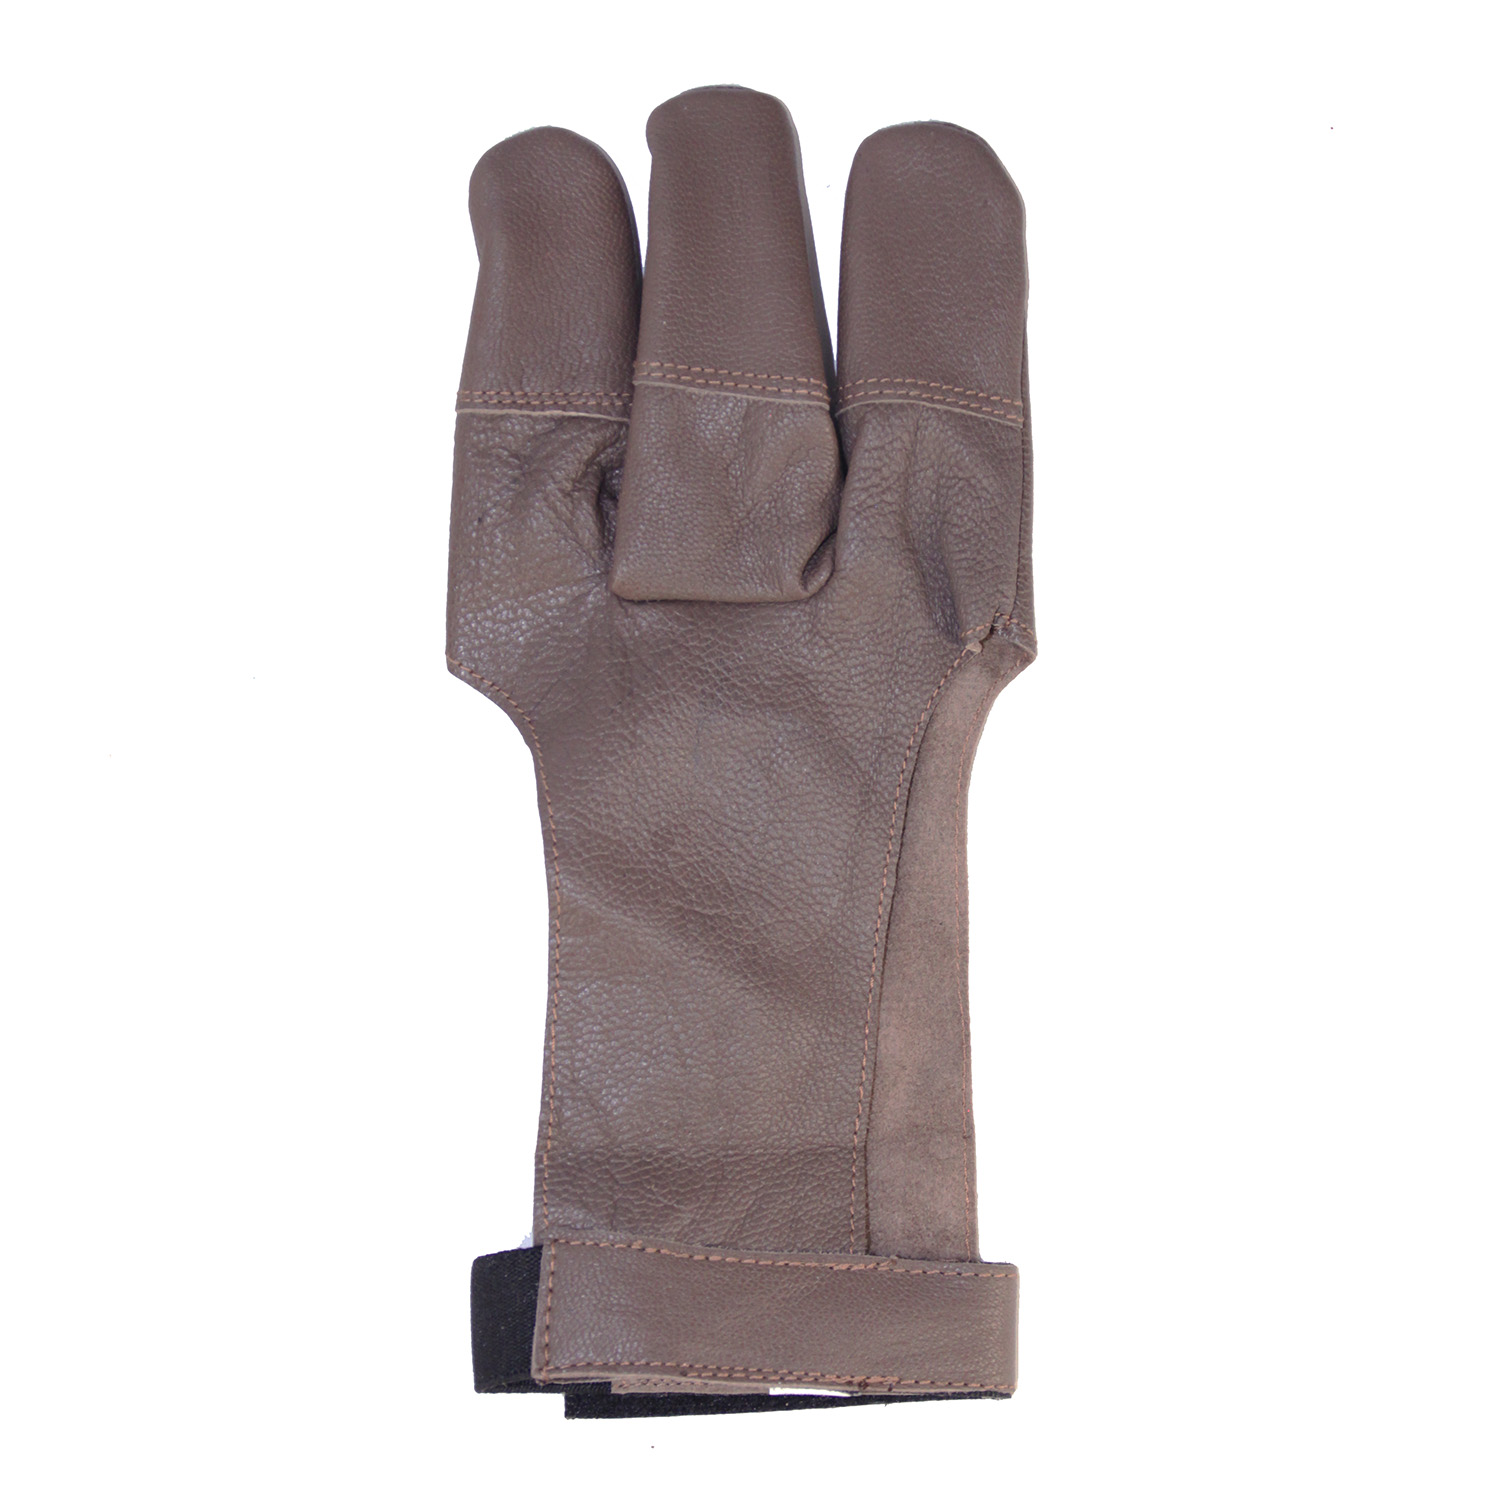 OMP Mountain Man Leather Shooting Glove Brown Large 